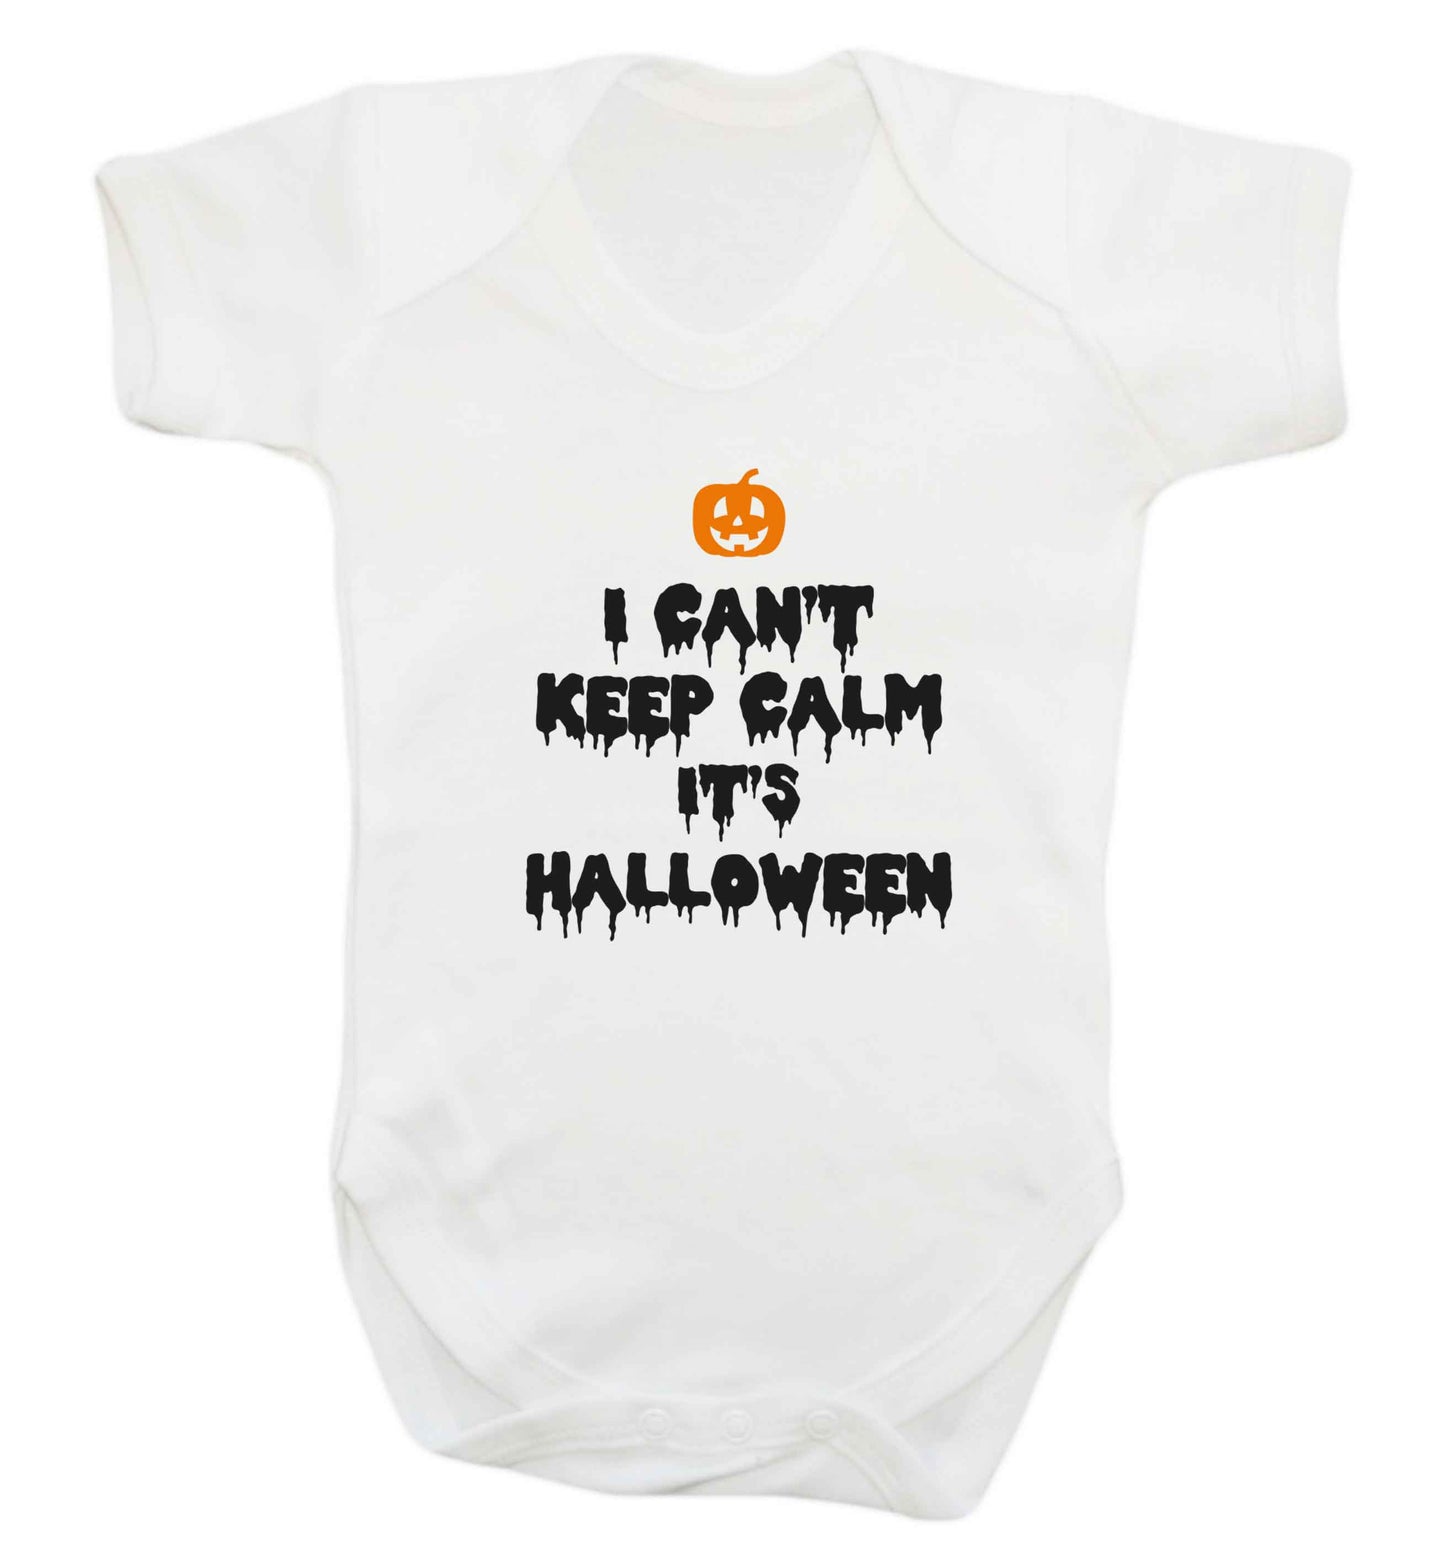 I can't keep calm it's halloween baby vest white 18-24 months